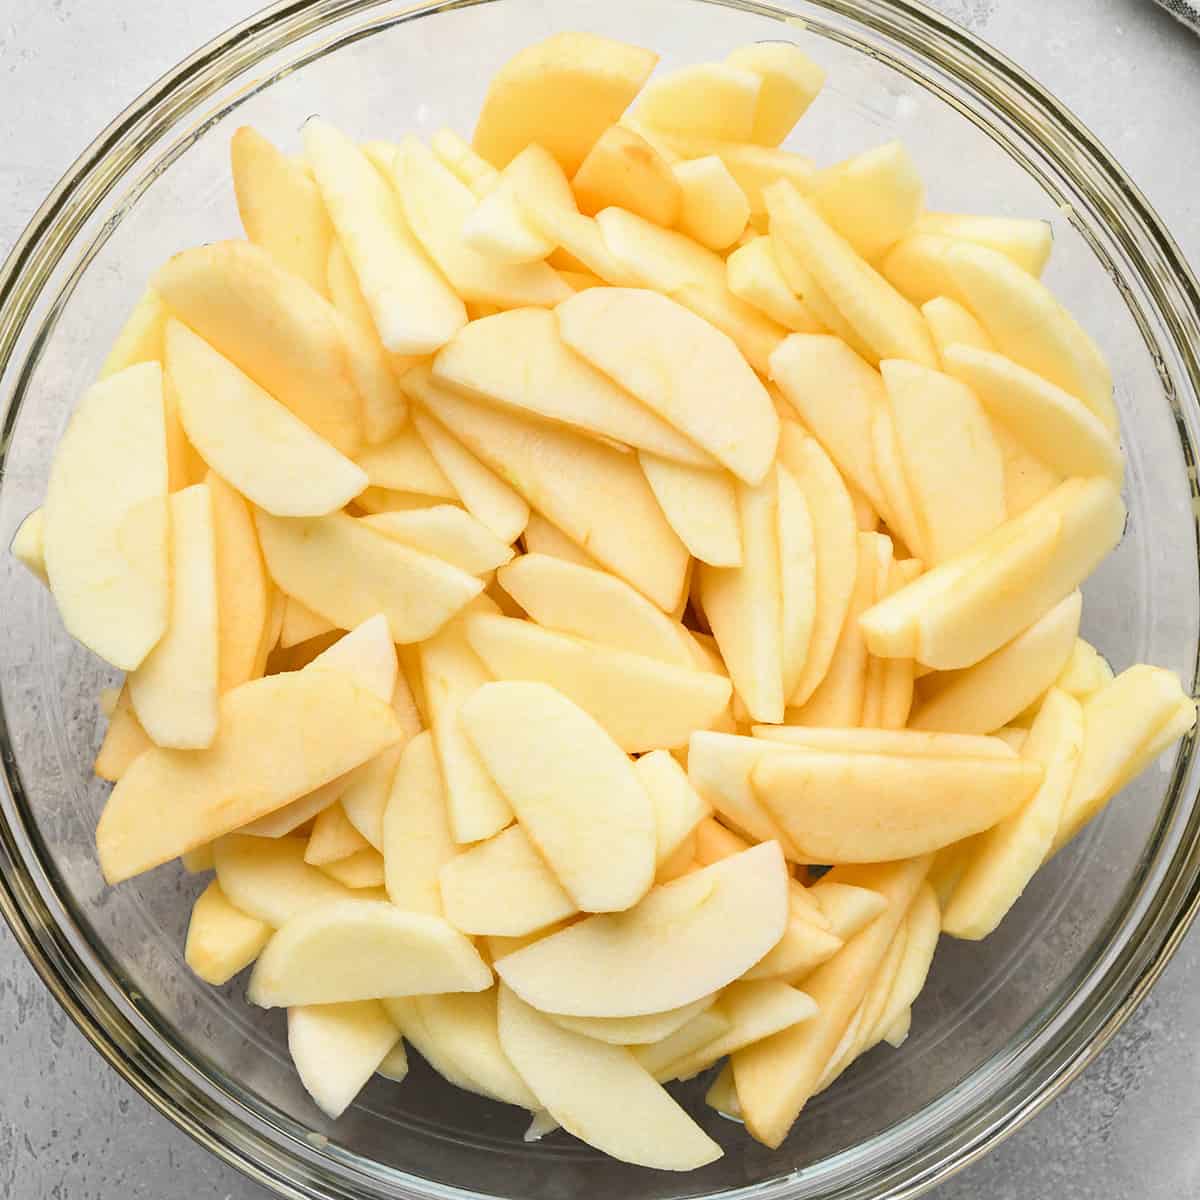 peeled and sliced apples in a glass bowl